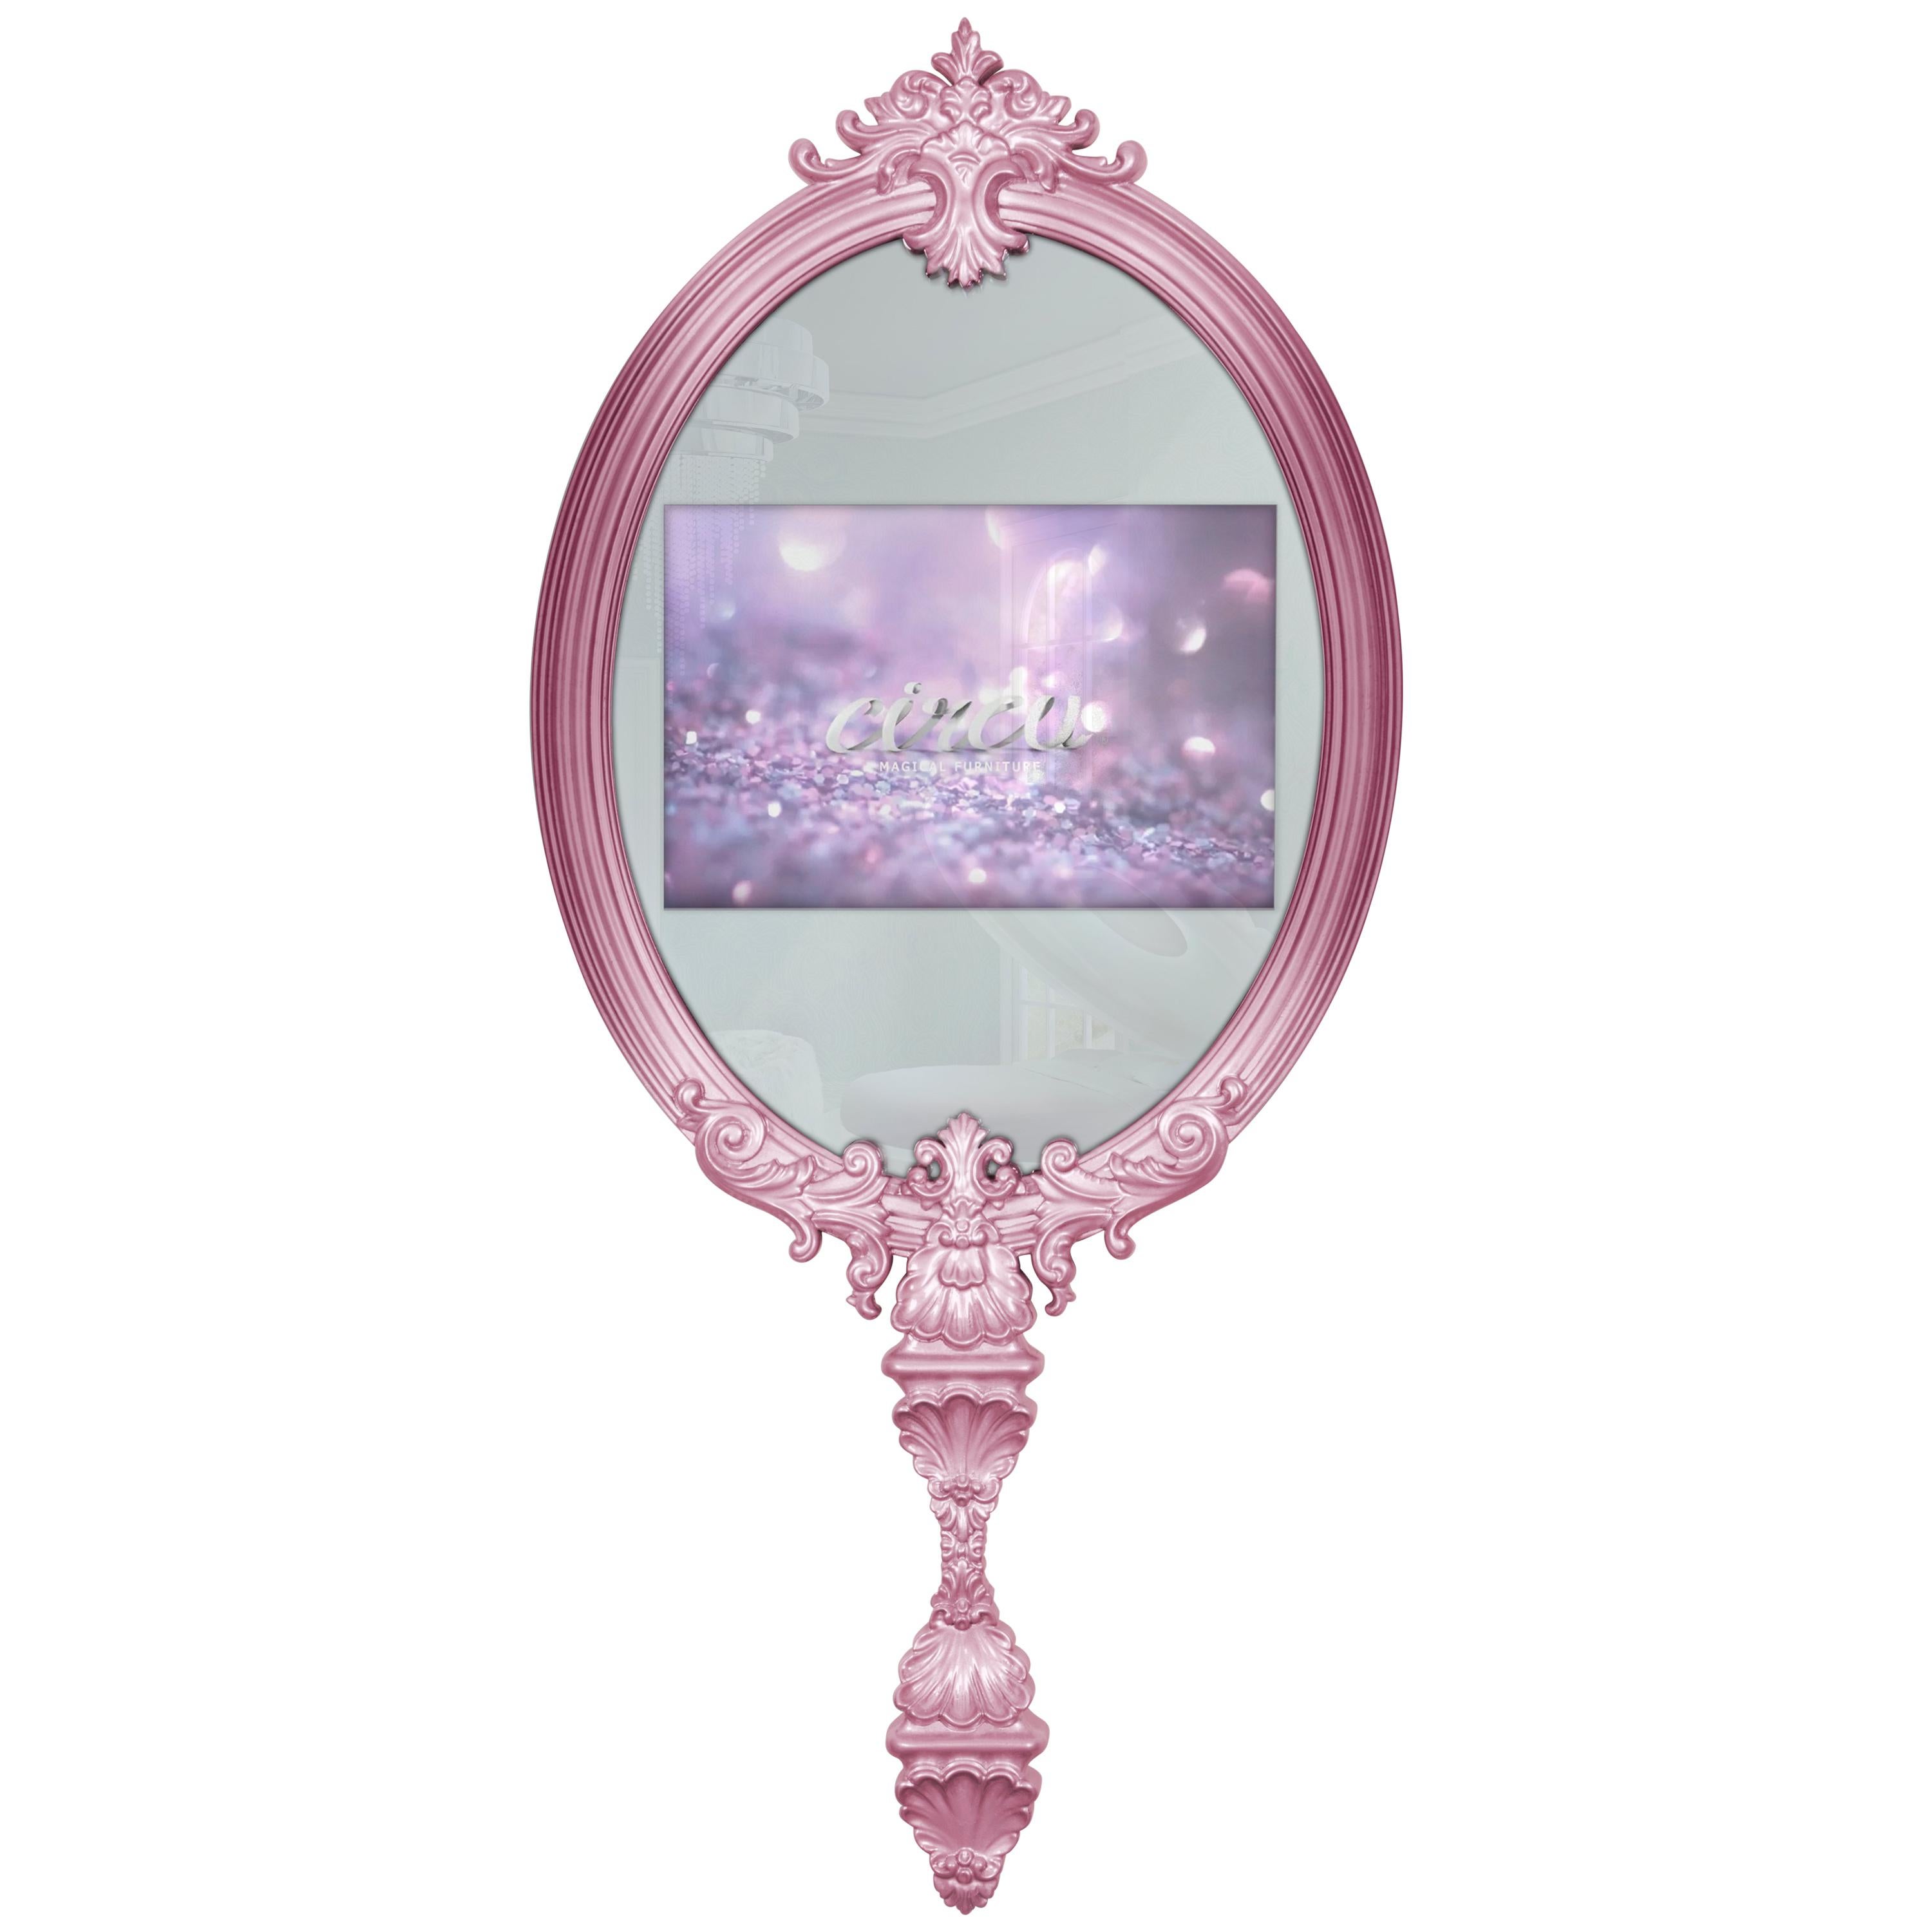 Magical Kids Mirror in Pink with Wood Frame and a TV by Circu Magical Furniture

Magical Kids Mirror in Pink with Wood Frame and a TV by Circu Magical Furniture is a kids mirror that is also magical! The Magical Mirror is the perfect wall mirror to